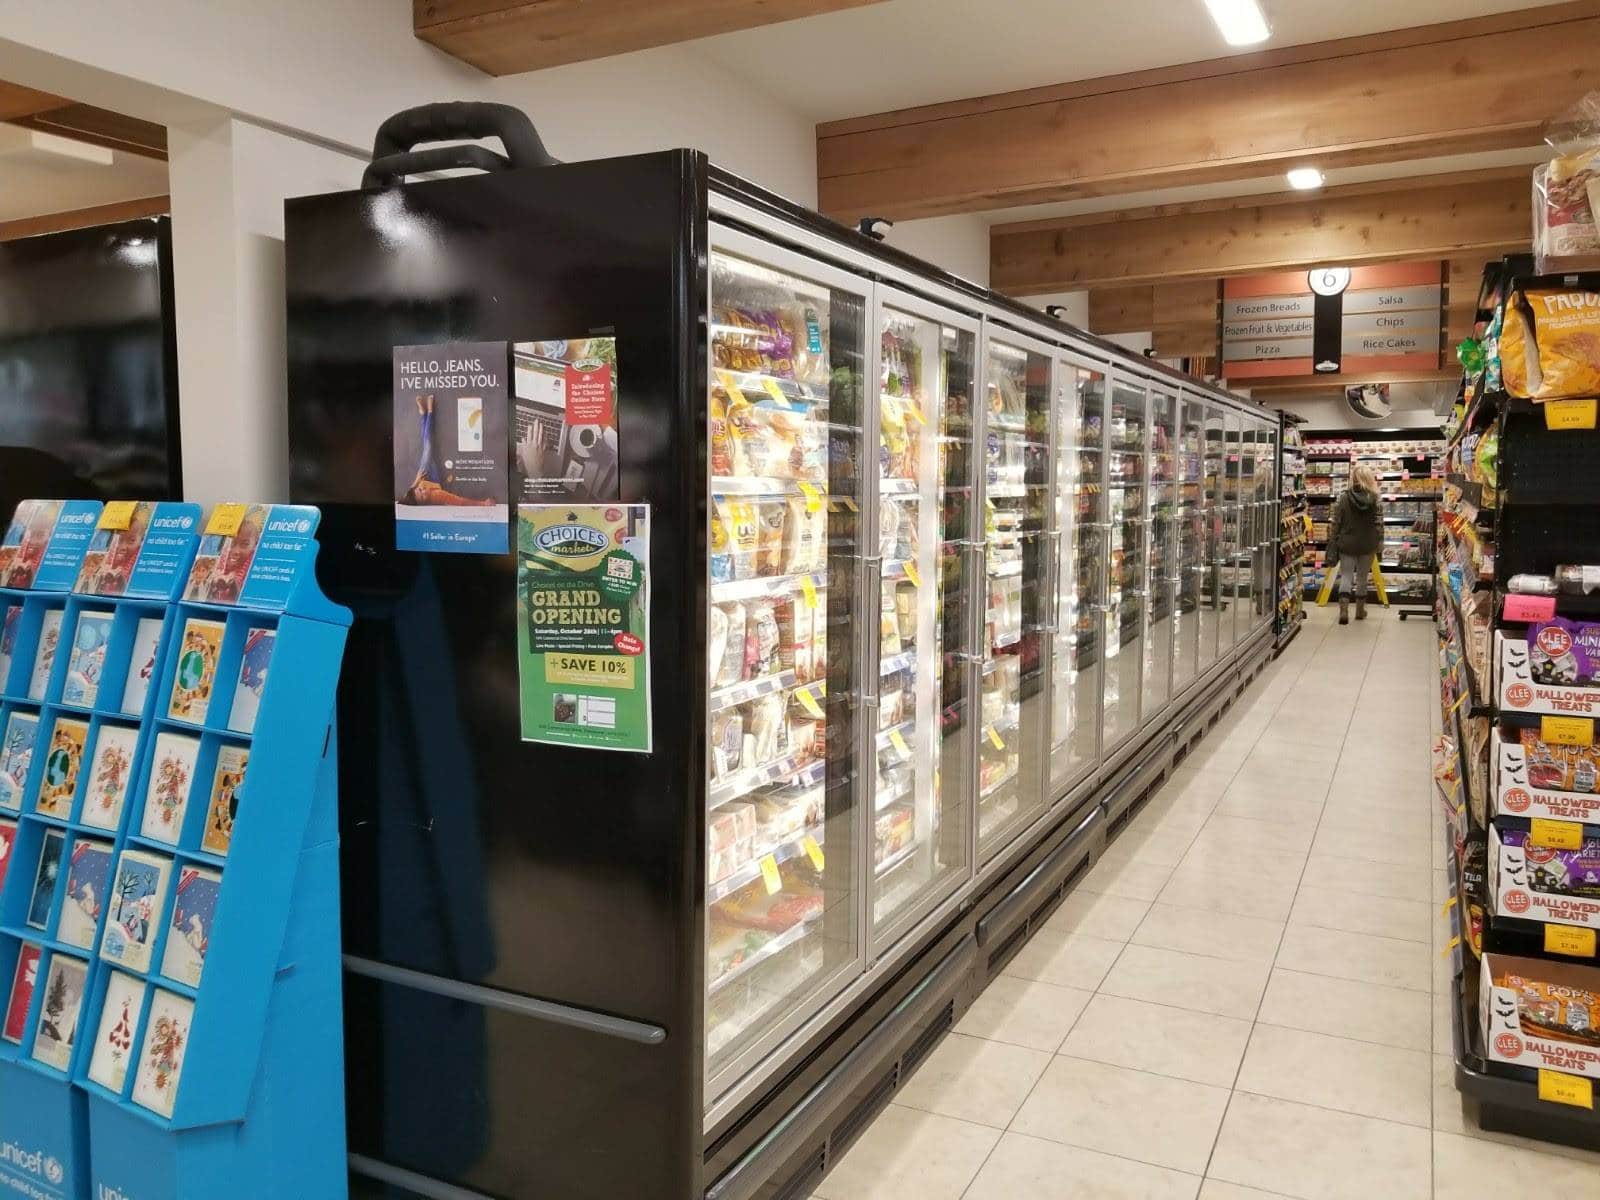 Grosery Merchandisers and Refrigeration System Vancouver | ADN Refrigeration - Commercial Refrigeration & Refrigerated Equipment